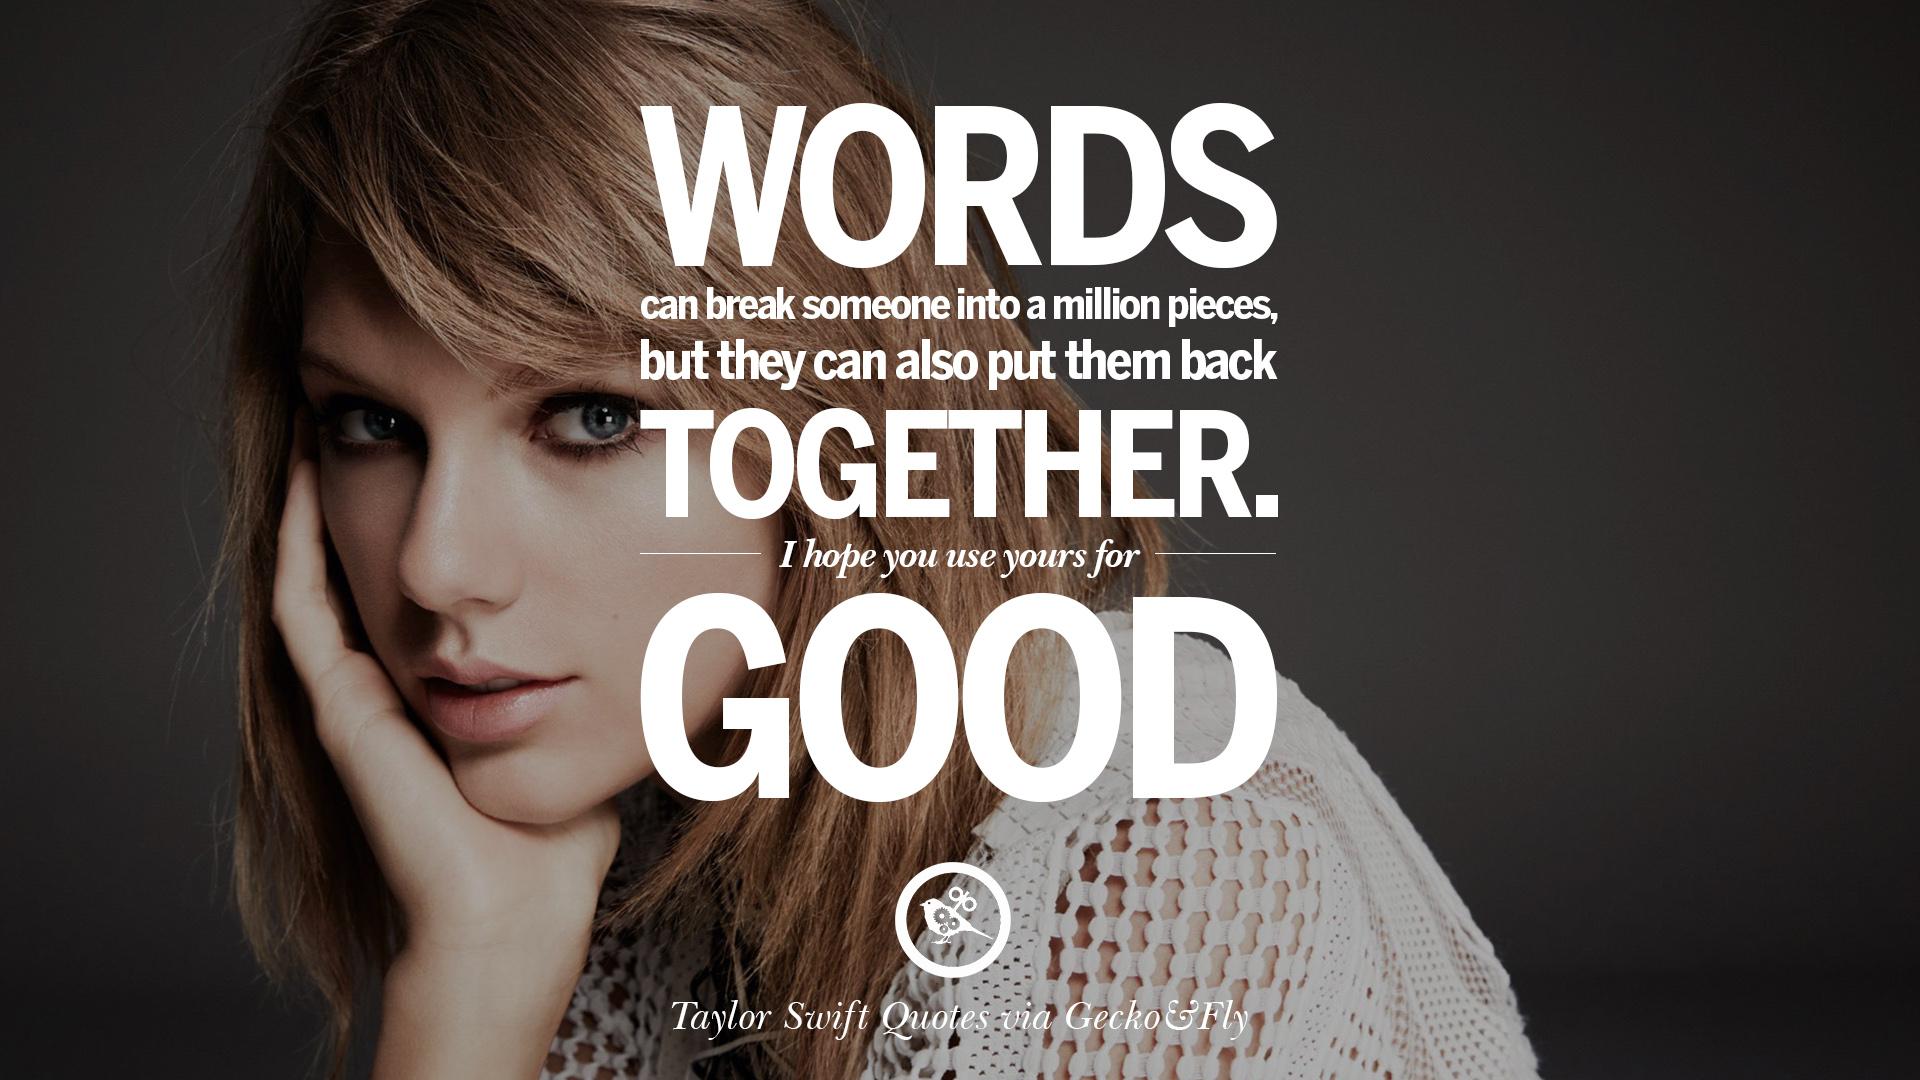 Taylor Swift Quotes 11 > Recruiting News And Views